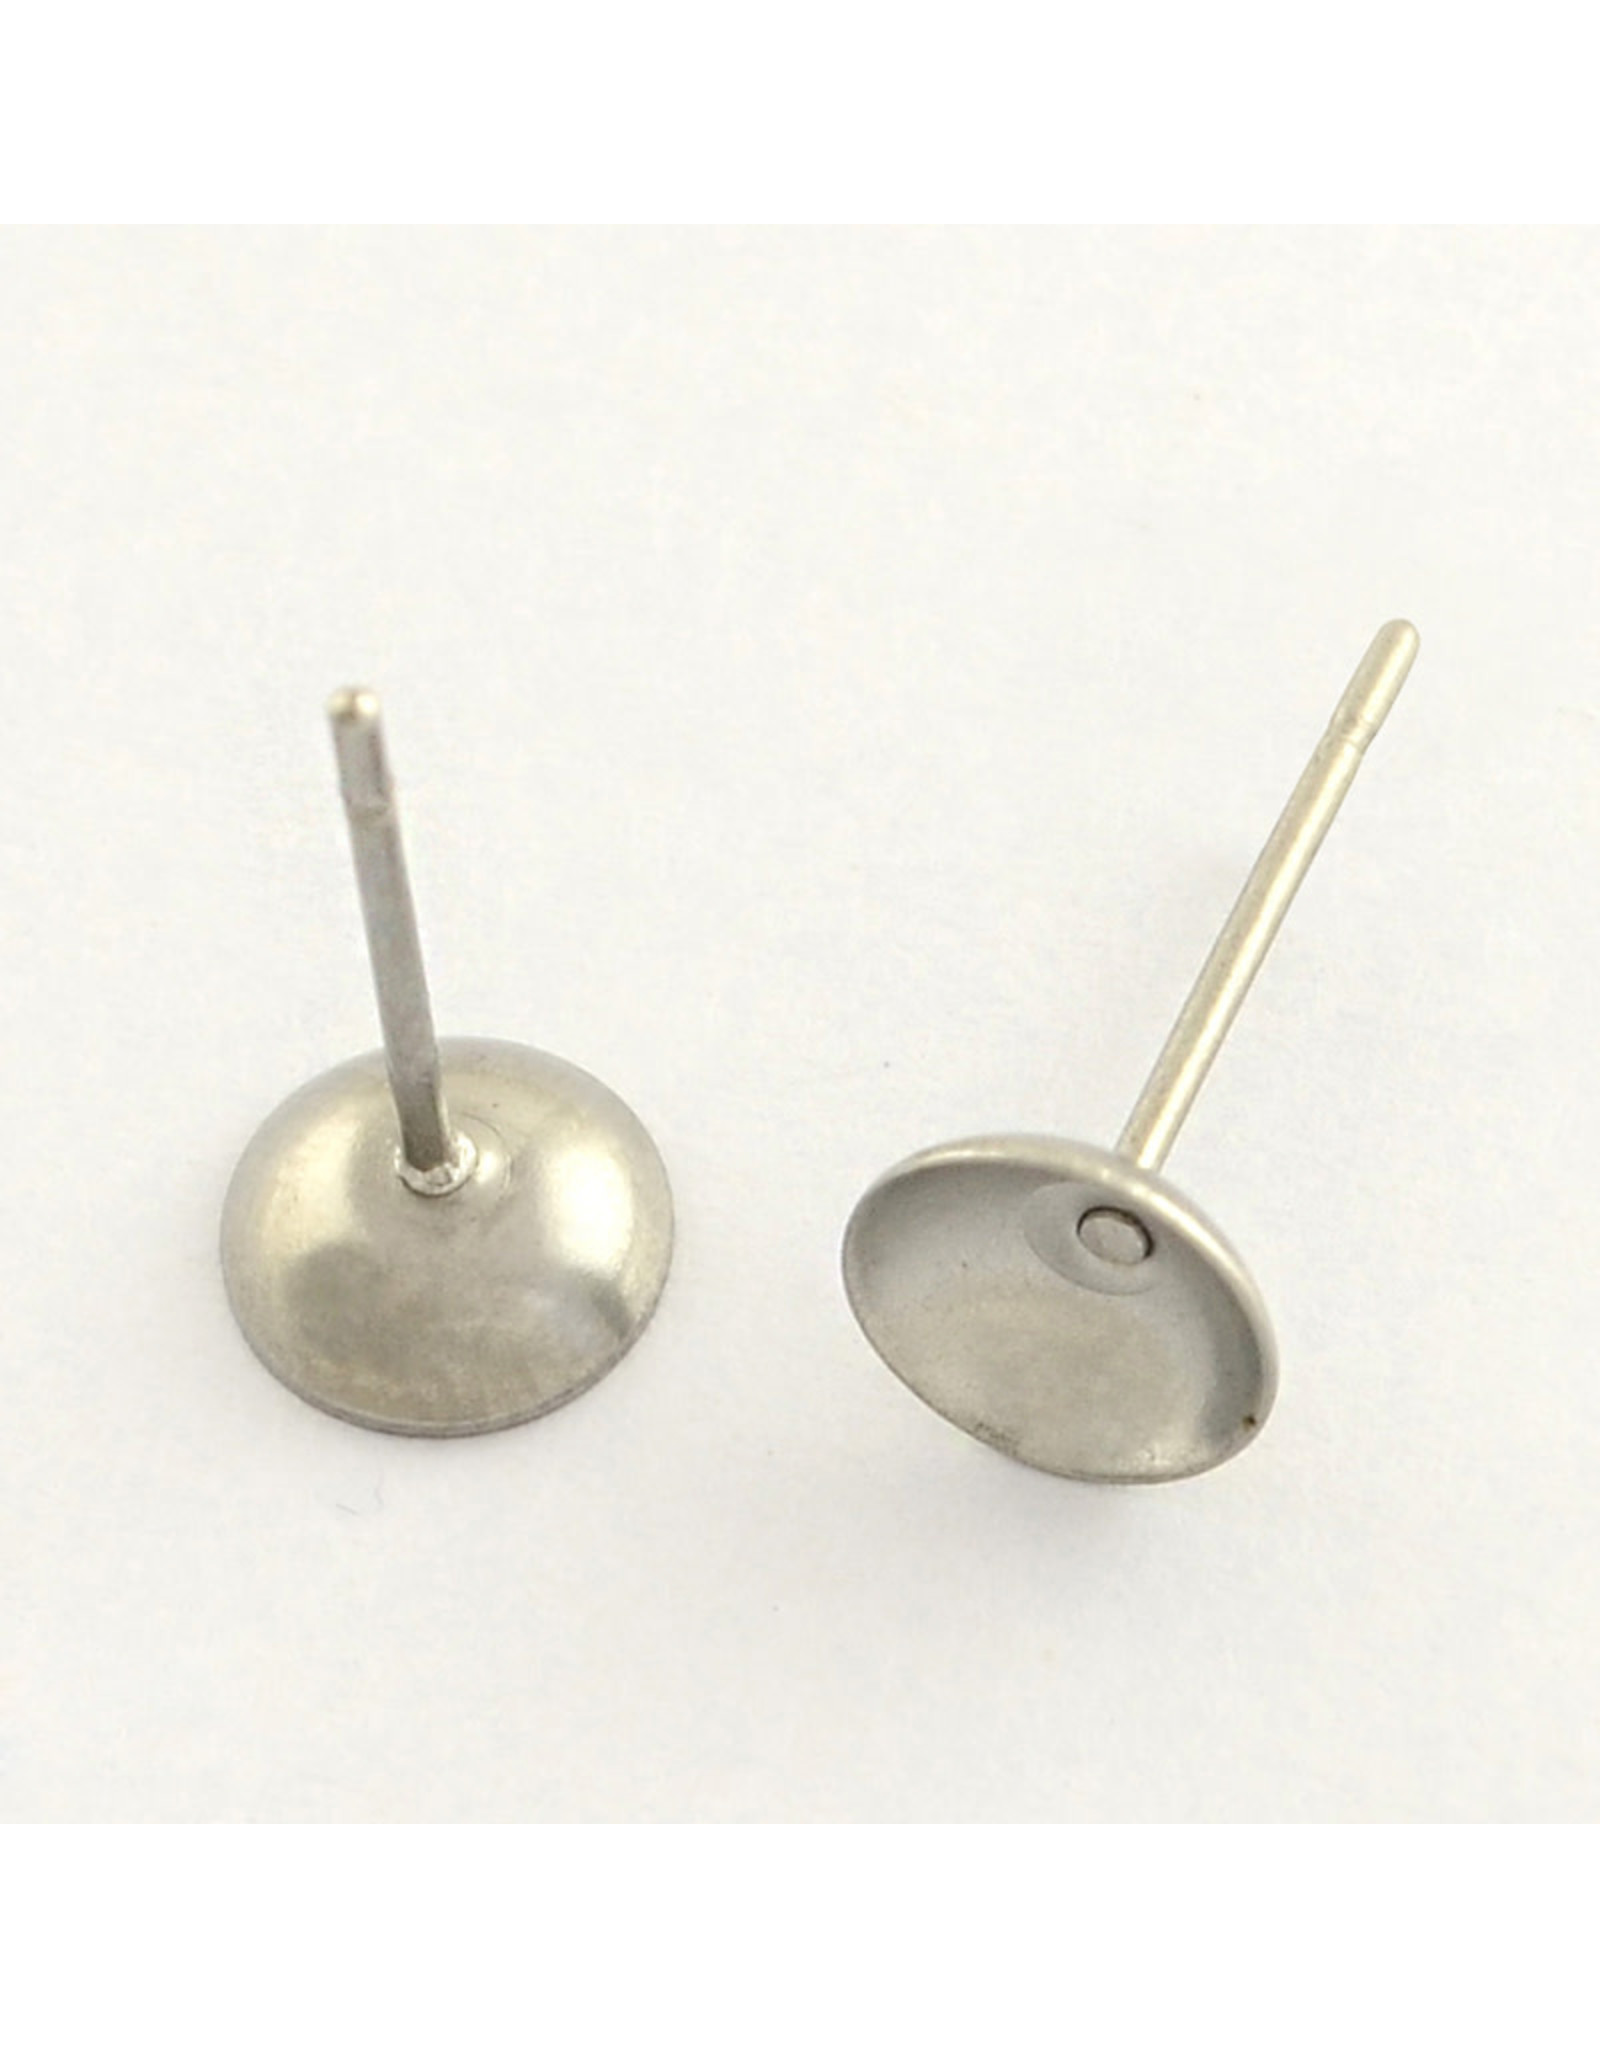 Ear Stud 6mm Cupped Stainless Steel  NF x50